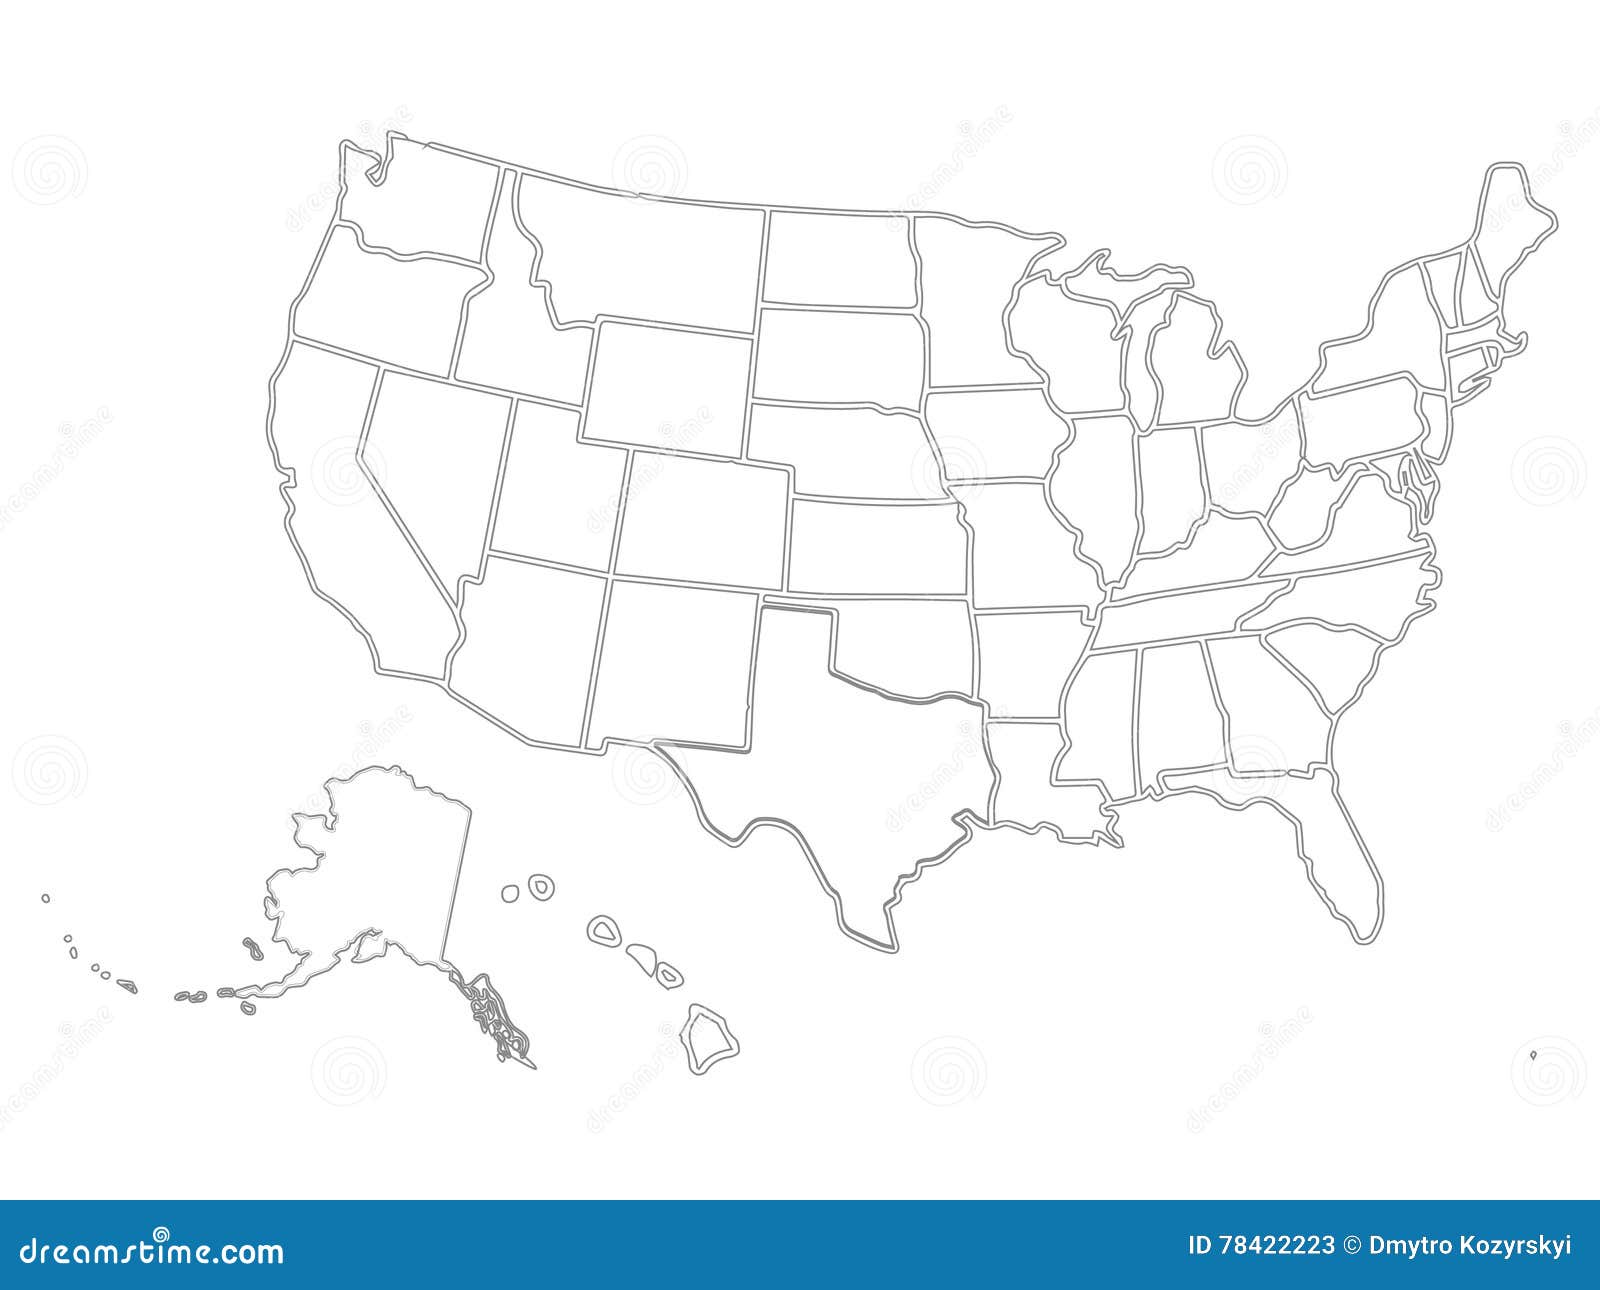 Blank Similar USA Map on White Background. United States of With Regard To United States Map Template Blank